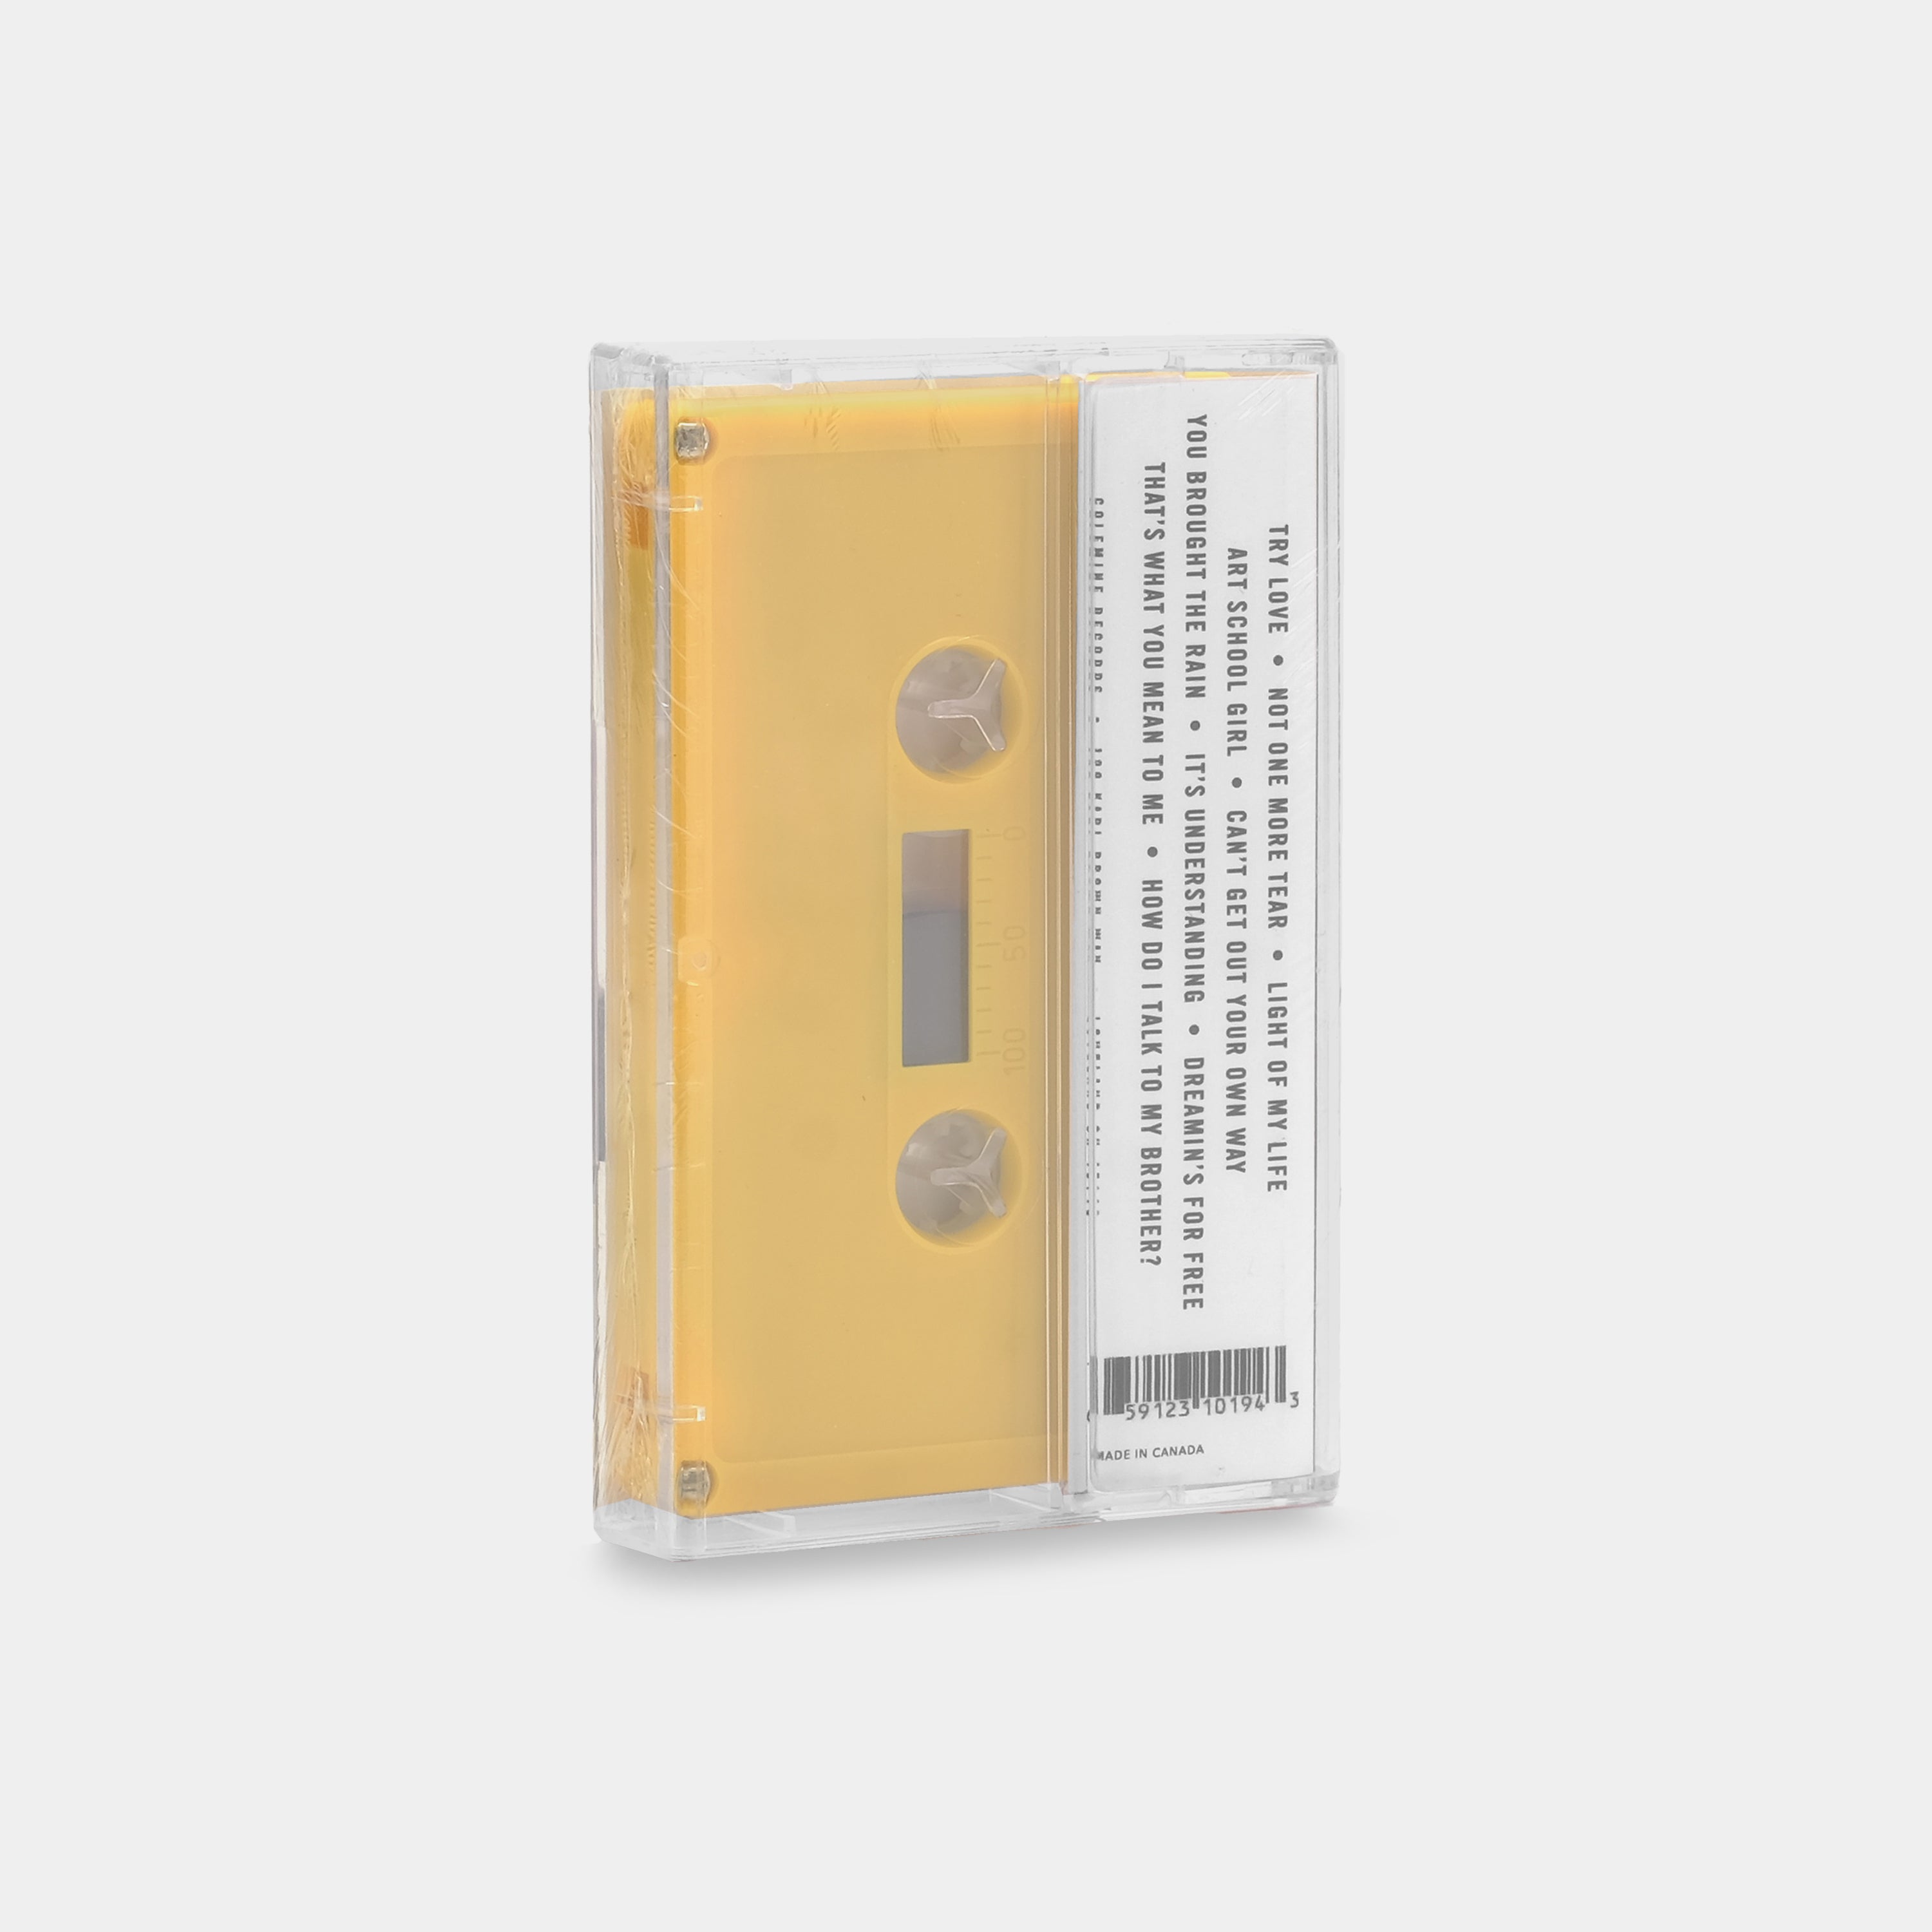 Ben Pirani - How Do I Talk To My Brother? Cassette Tape